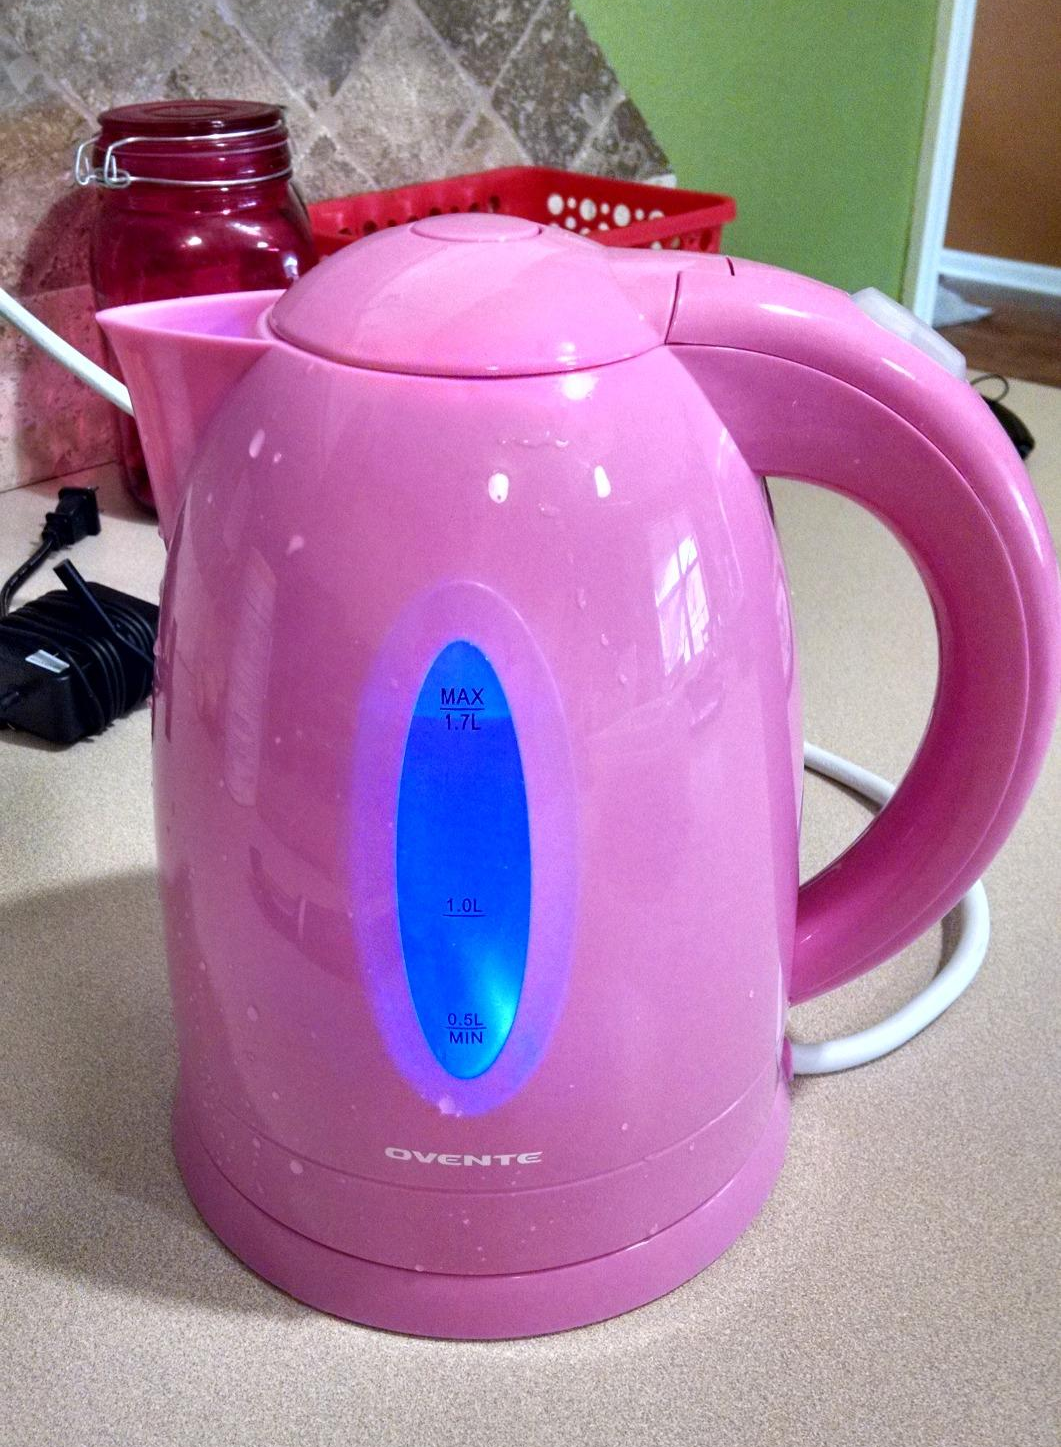 MEISON Electric Kettle Review 